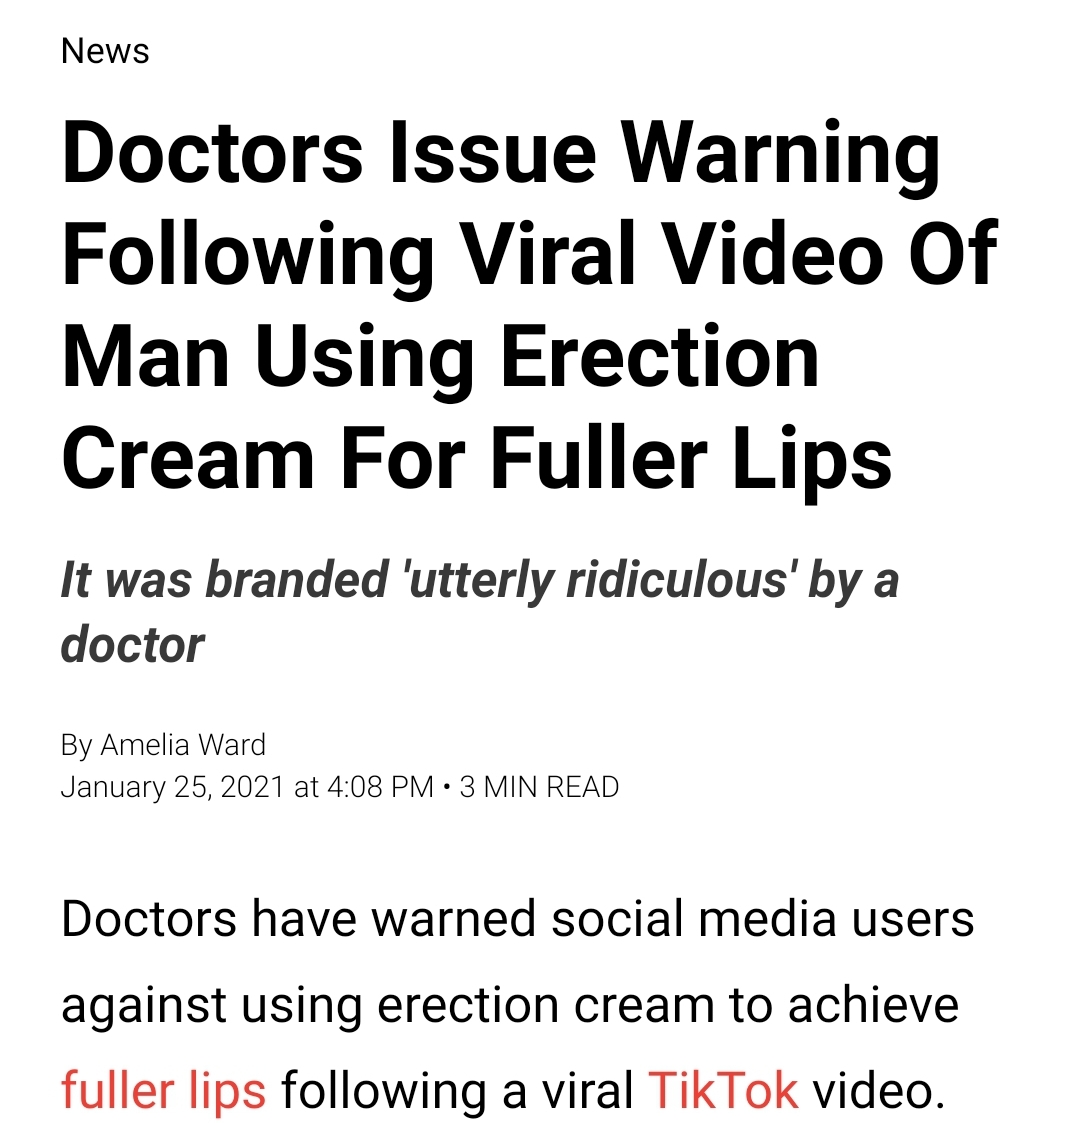 angle - News Doctors Issue Warning ing Viral Video Of Man Using Erection Cream For Fuller Lips It was branded 'utterly ridiculous' by a doctor By Amelia Ward at 3 Min Read Doctors have warned social media users against using erection cream to achieve full